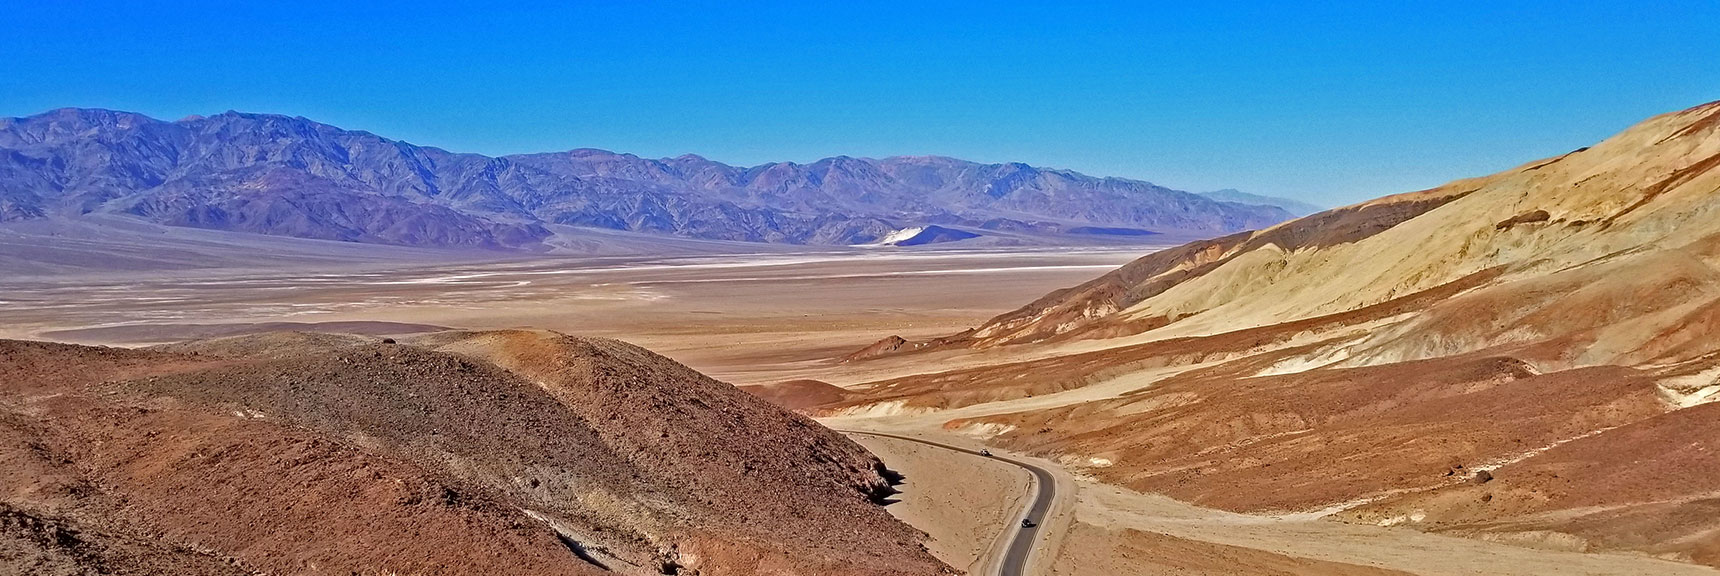 Northwestern View of Death Valley and Northern Panamint Mountain Range | Artists Drive Hidden Canyon Hikes | Death Valley National Park, California